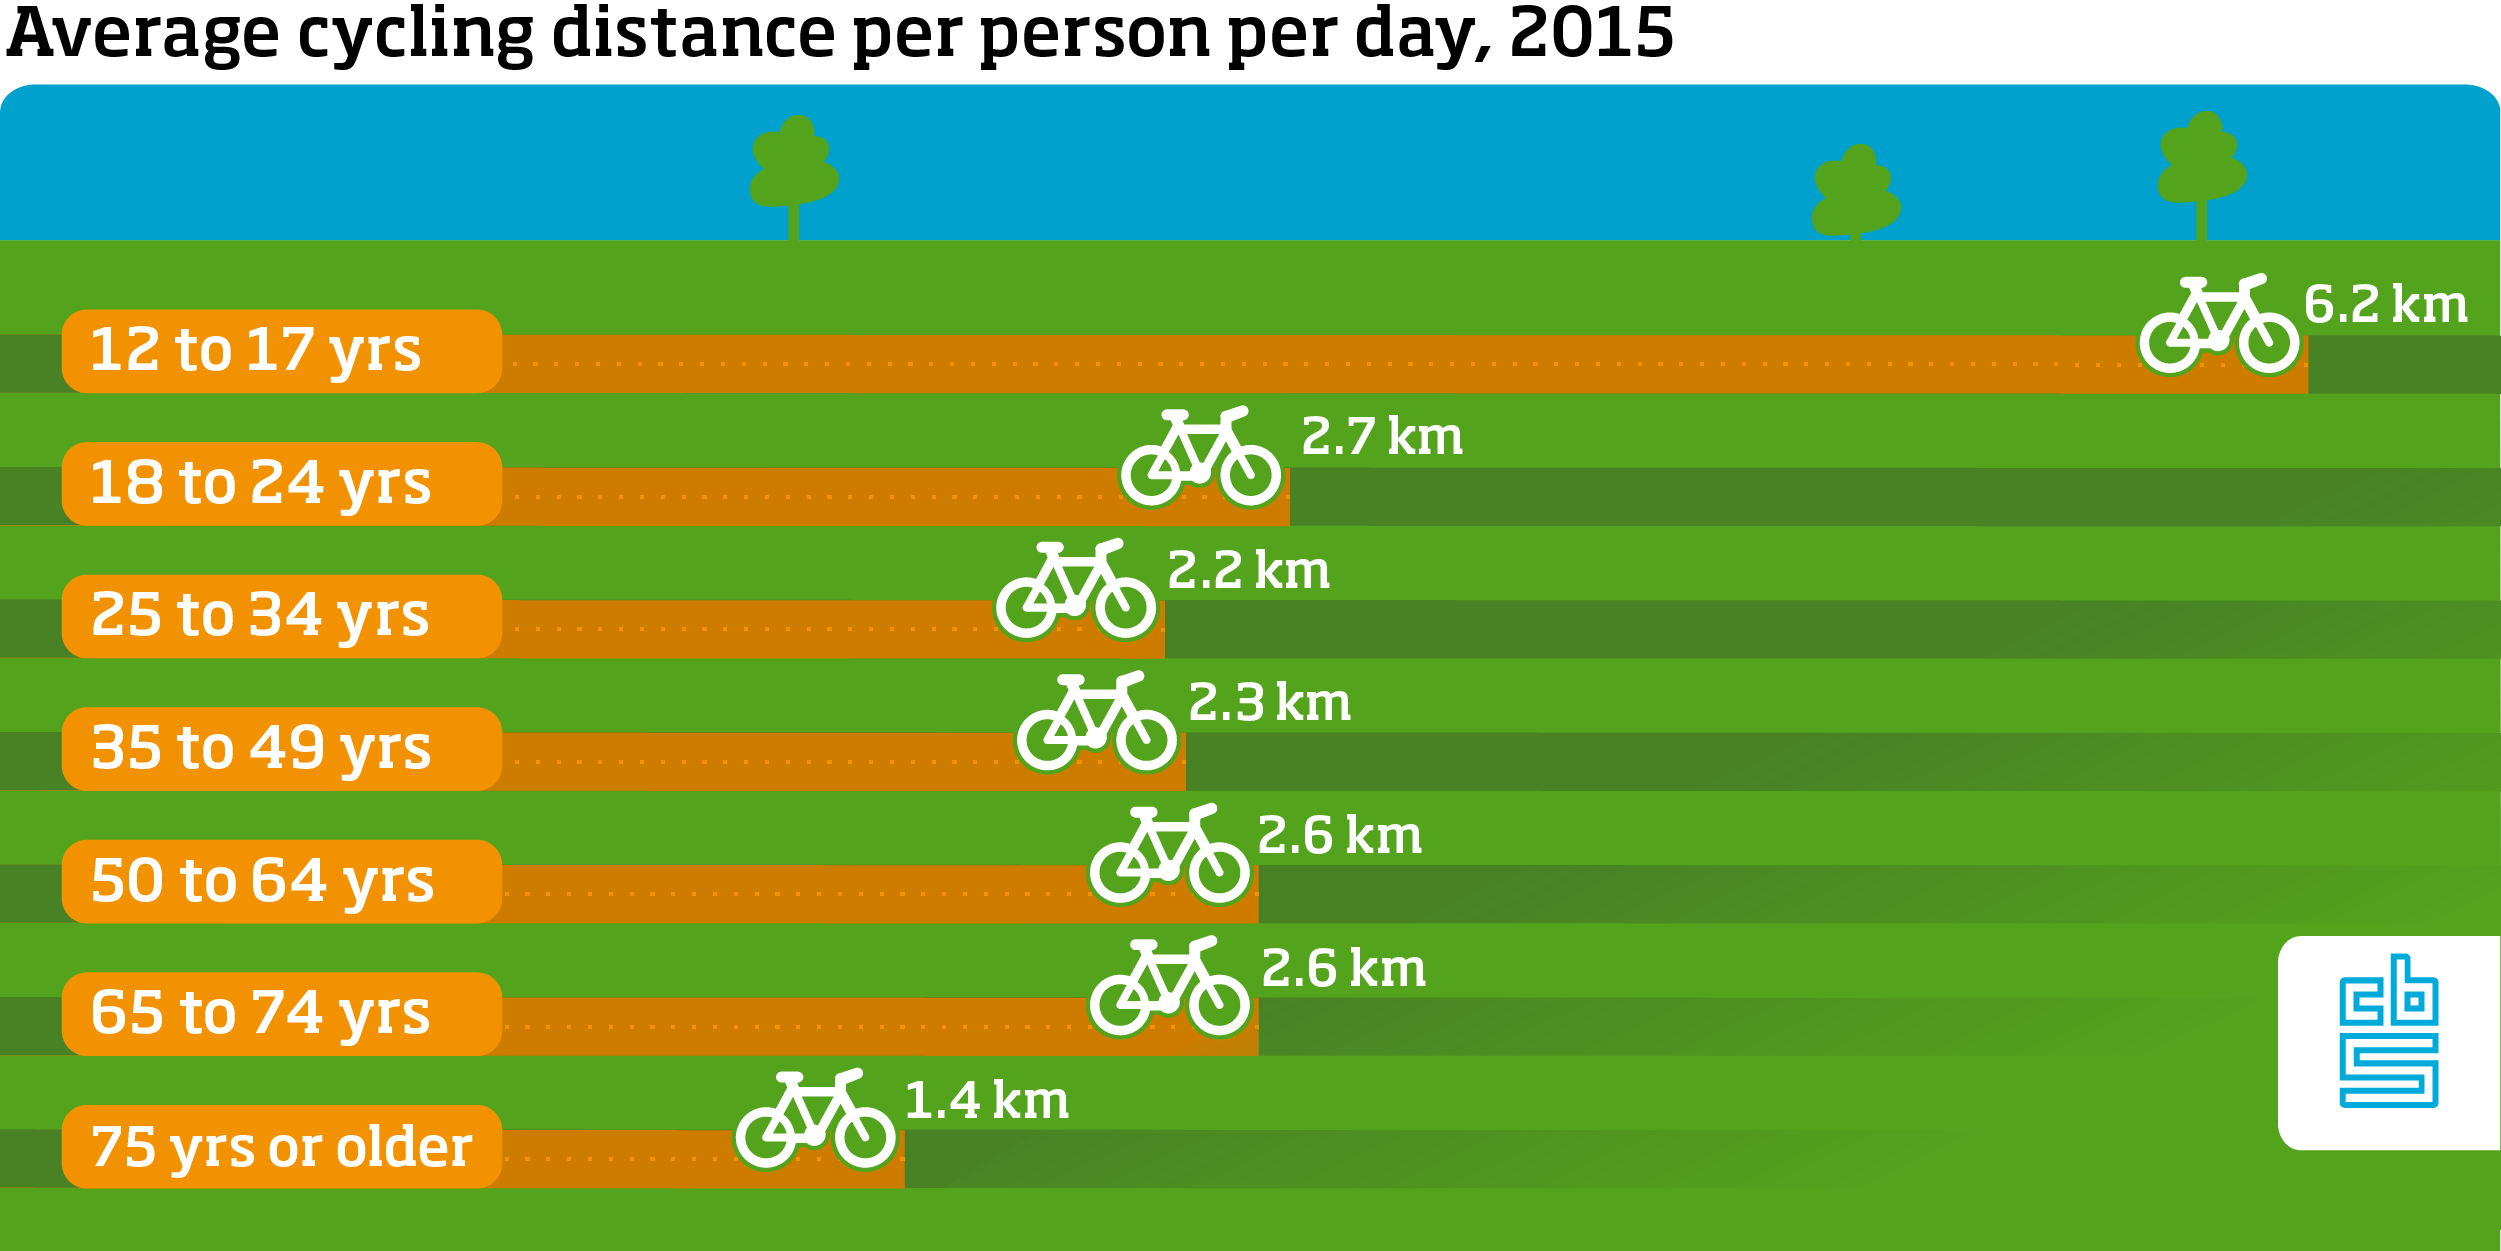 The average cycling distance per person per day in 2015 was: 6.2 km for people aged 12 to 17 years, 2.7 km for people aged 18 to 24 years, 2.2 km for people aged 25 to 34 years, 2.3 km for people aged 35 to 49 years, 2.6 km for people aged 50 to 64 years, and 1.4 km for people aged 75 years or older.